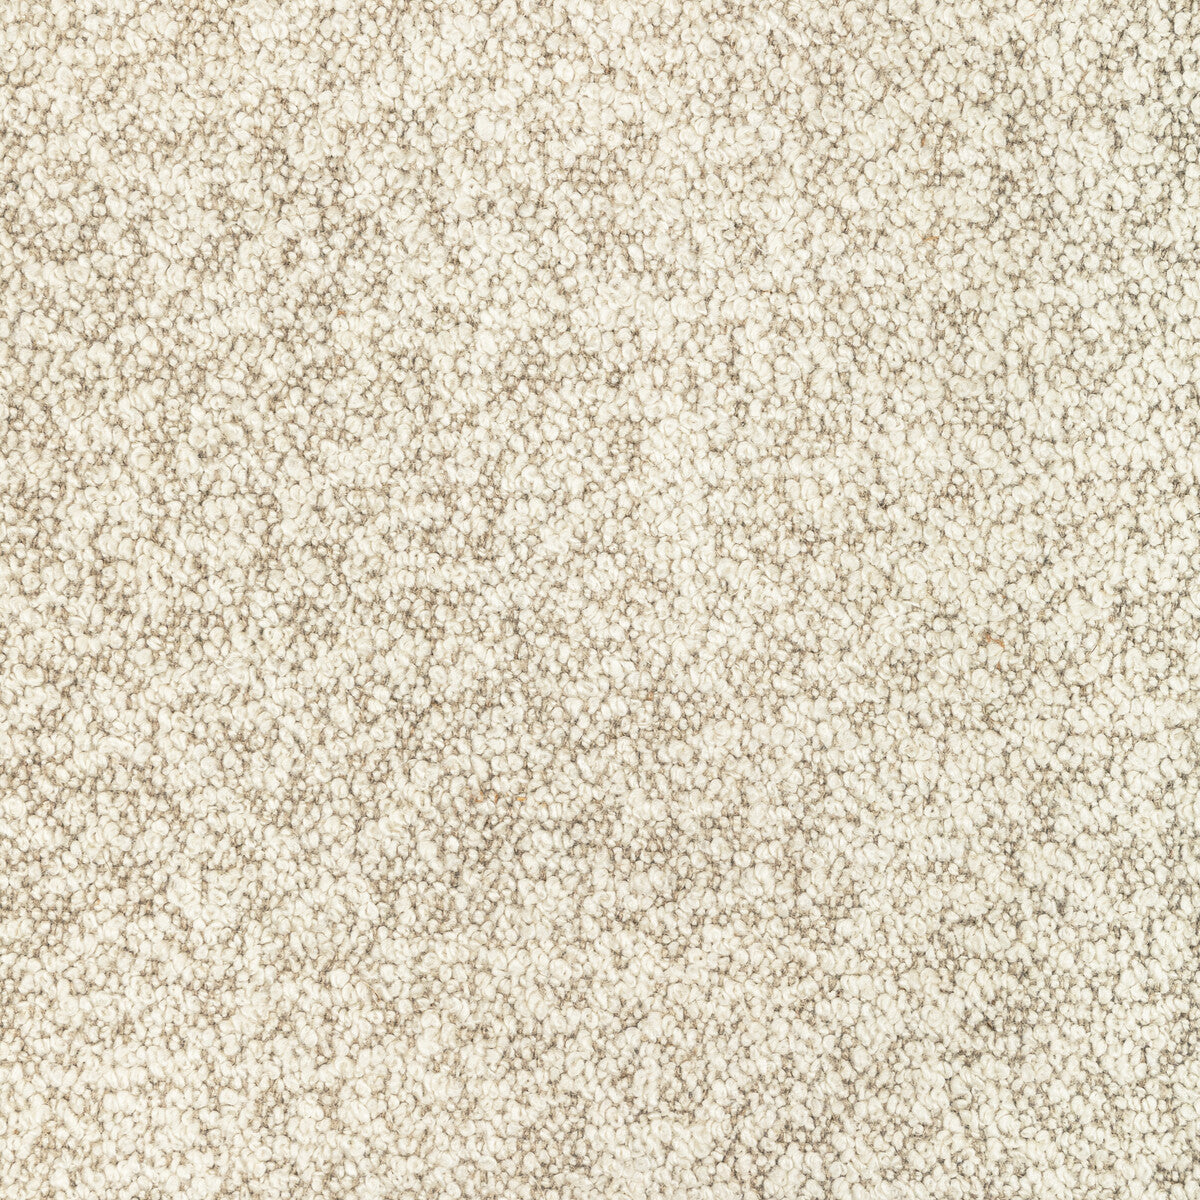 Baker House Boucle fabric in oatmeal color - pattern BF10965.230.0 - by G P &amp; J Baker in the Baker House Boucle collection